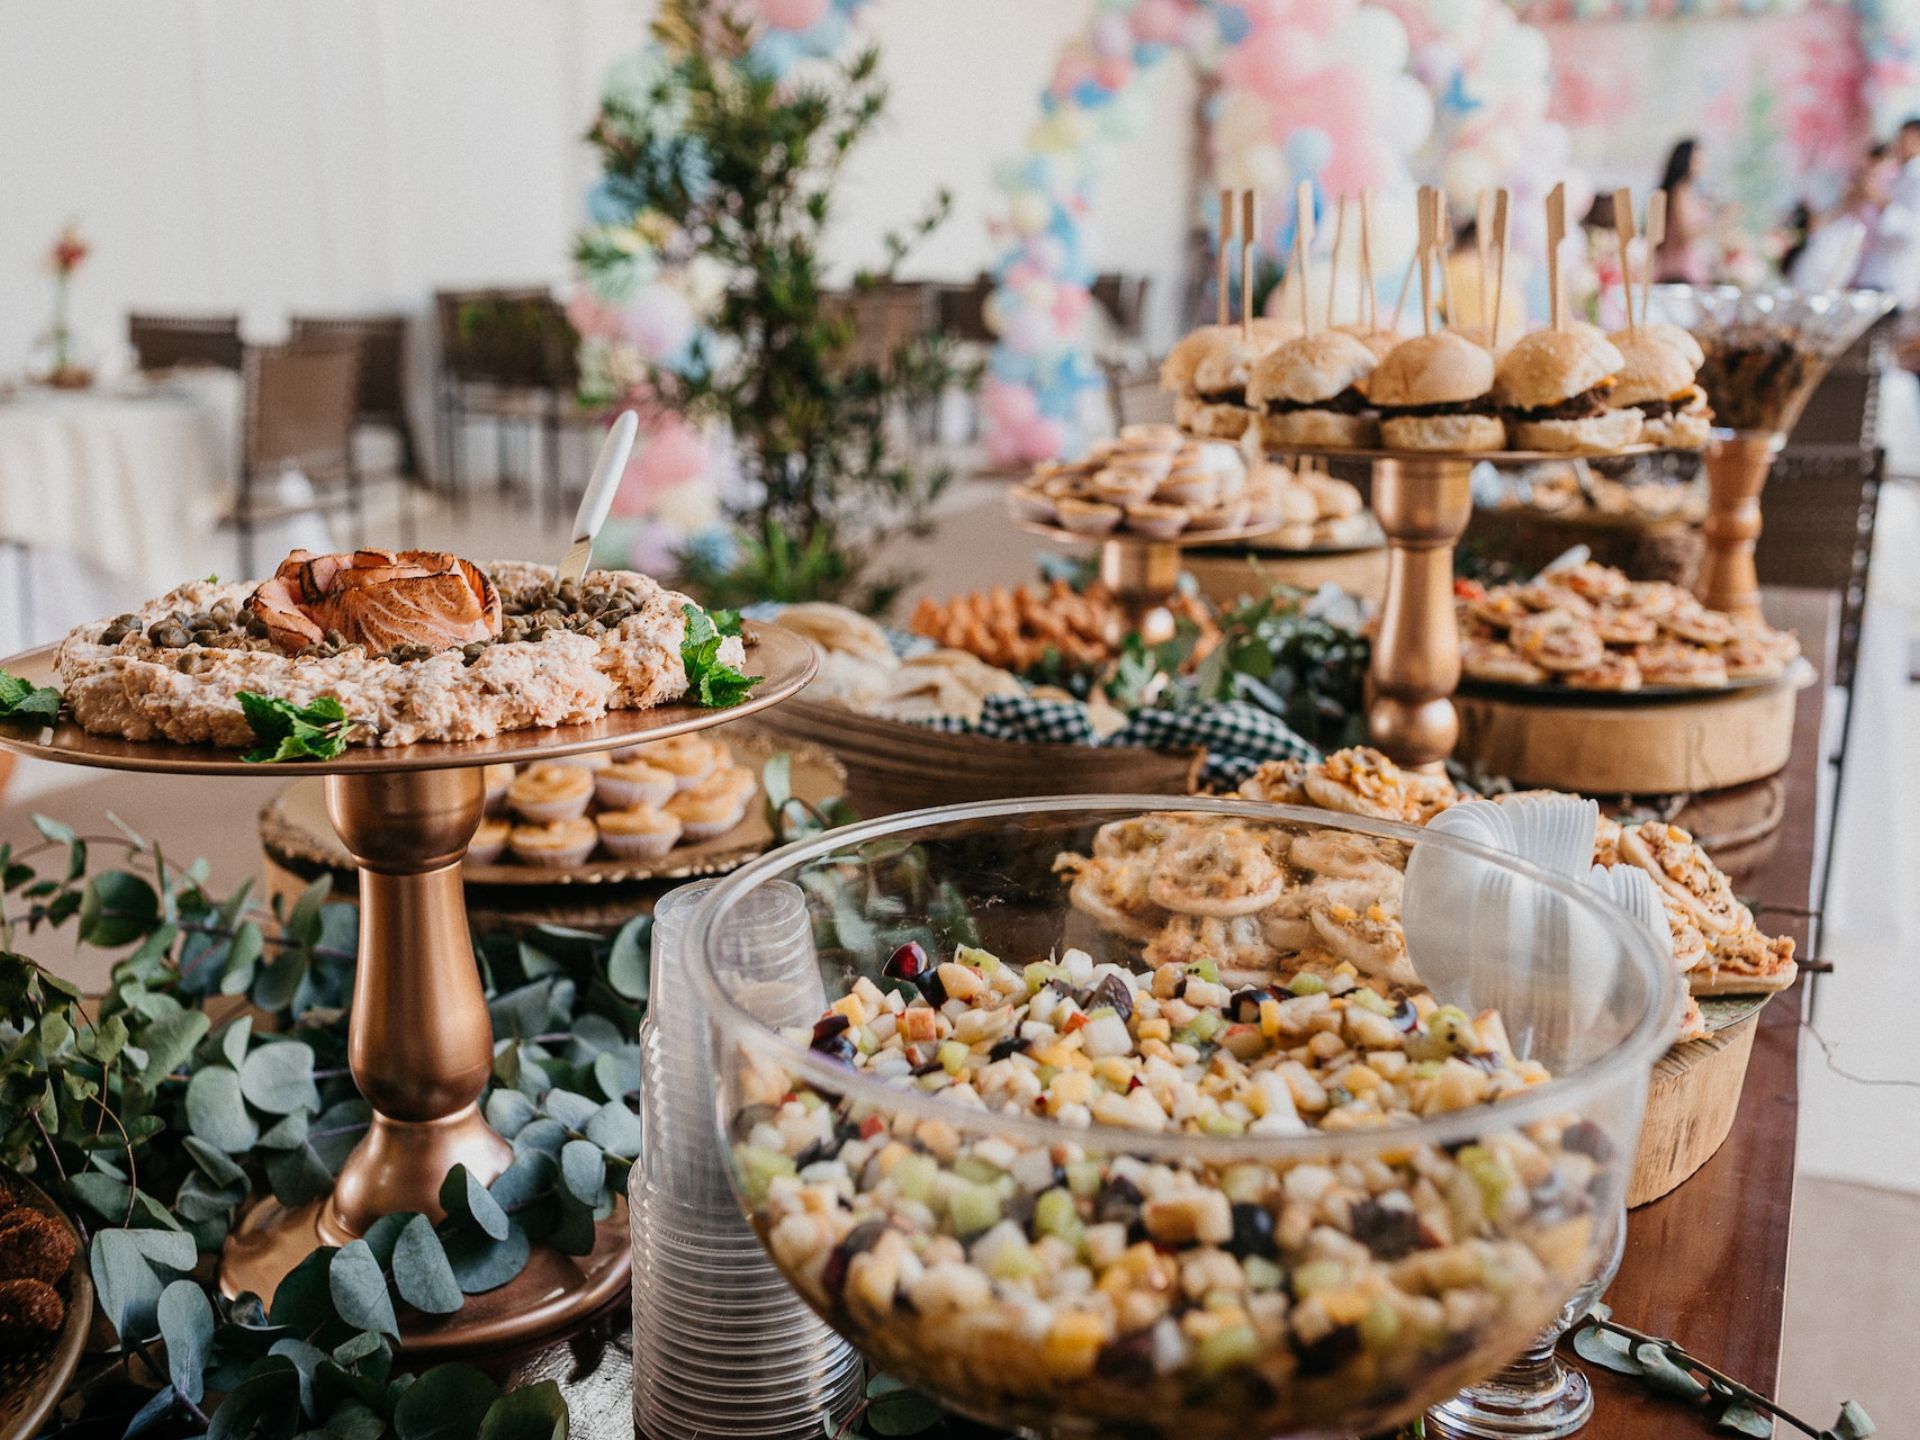 A table filled with wedding foods.